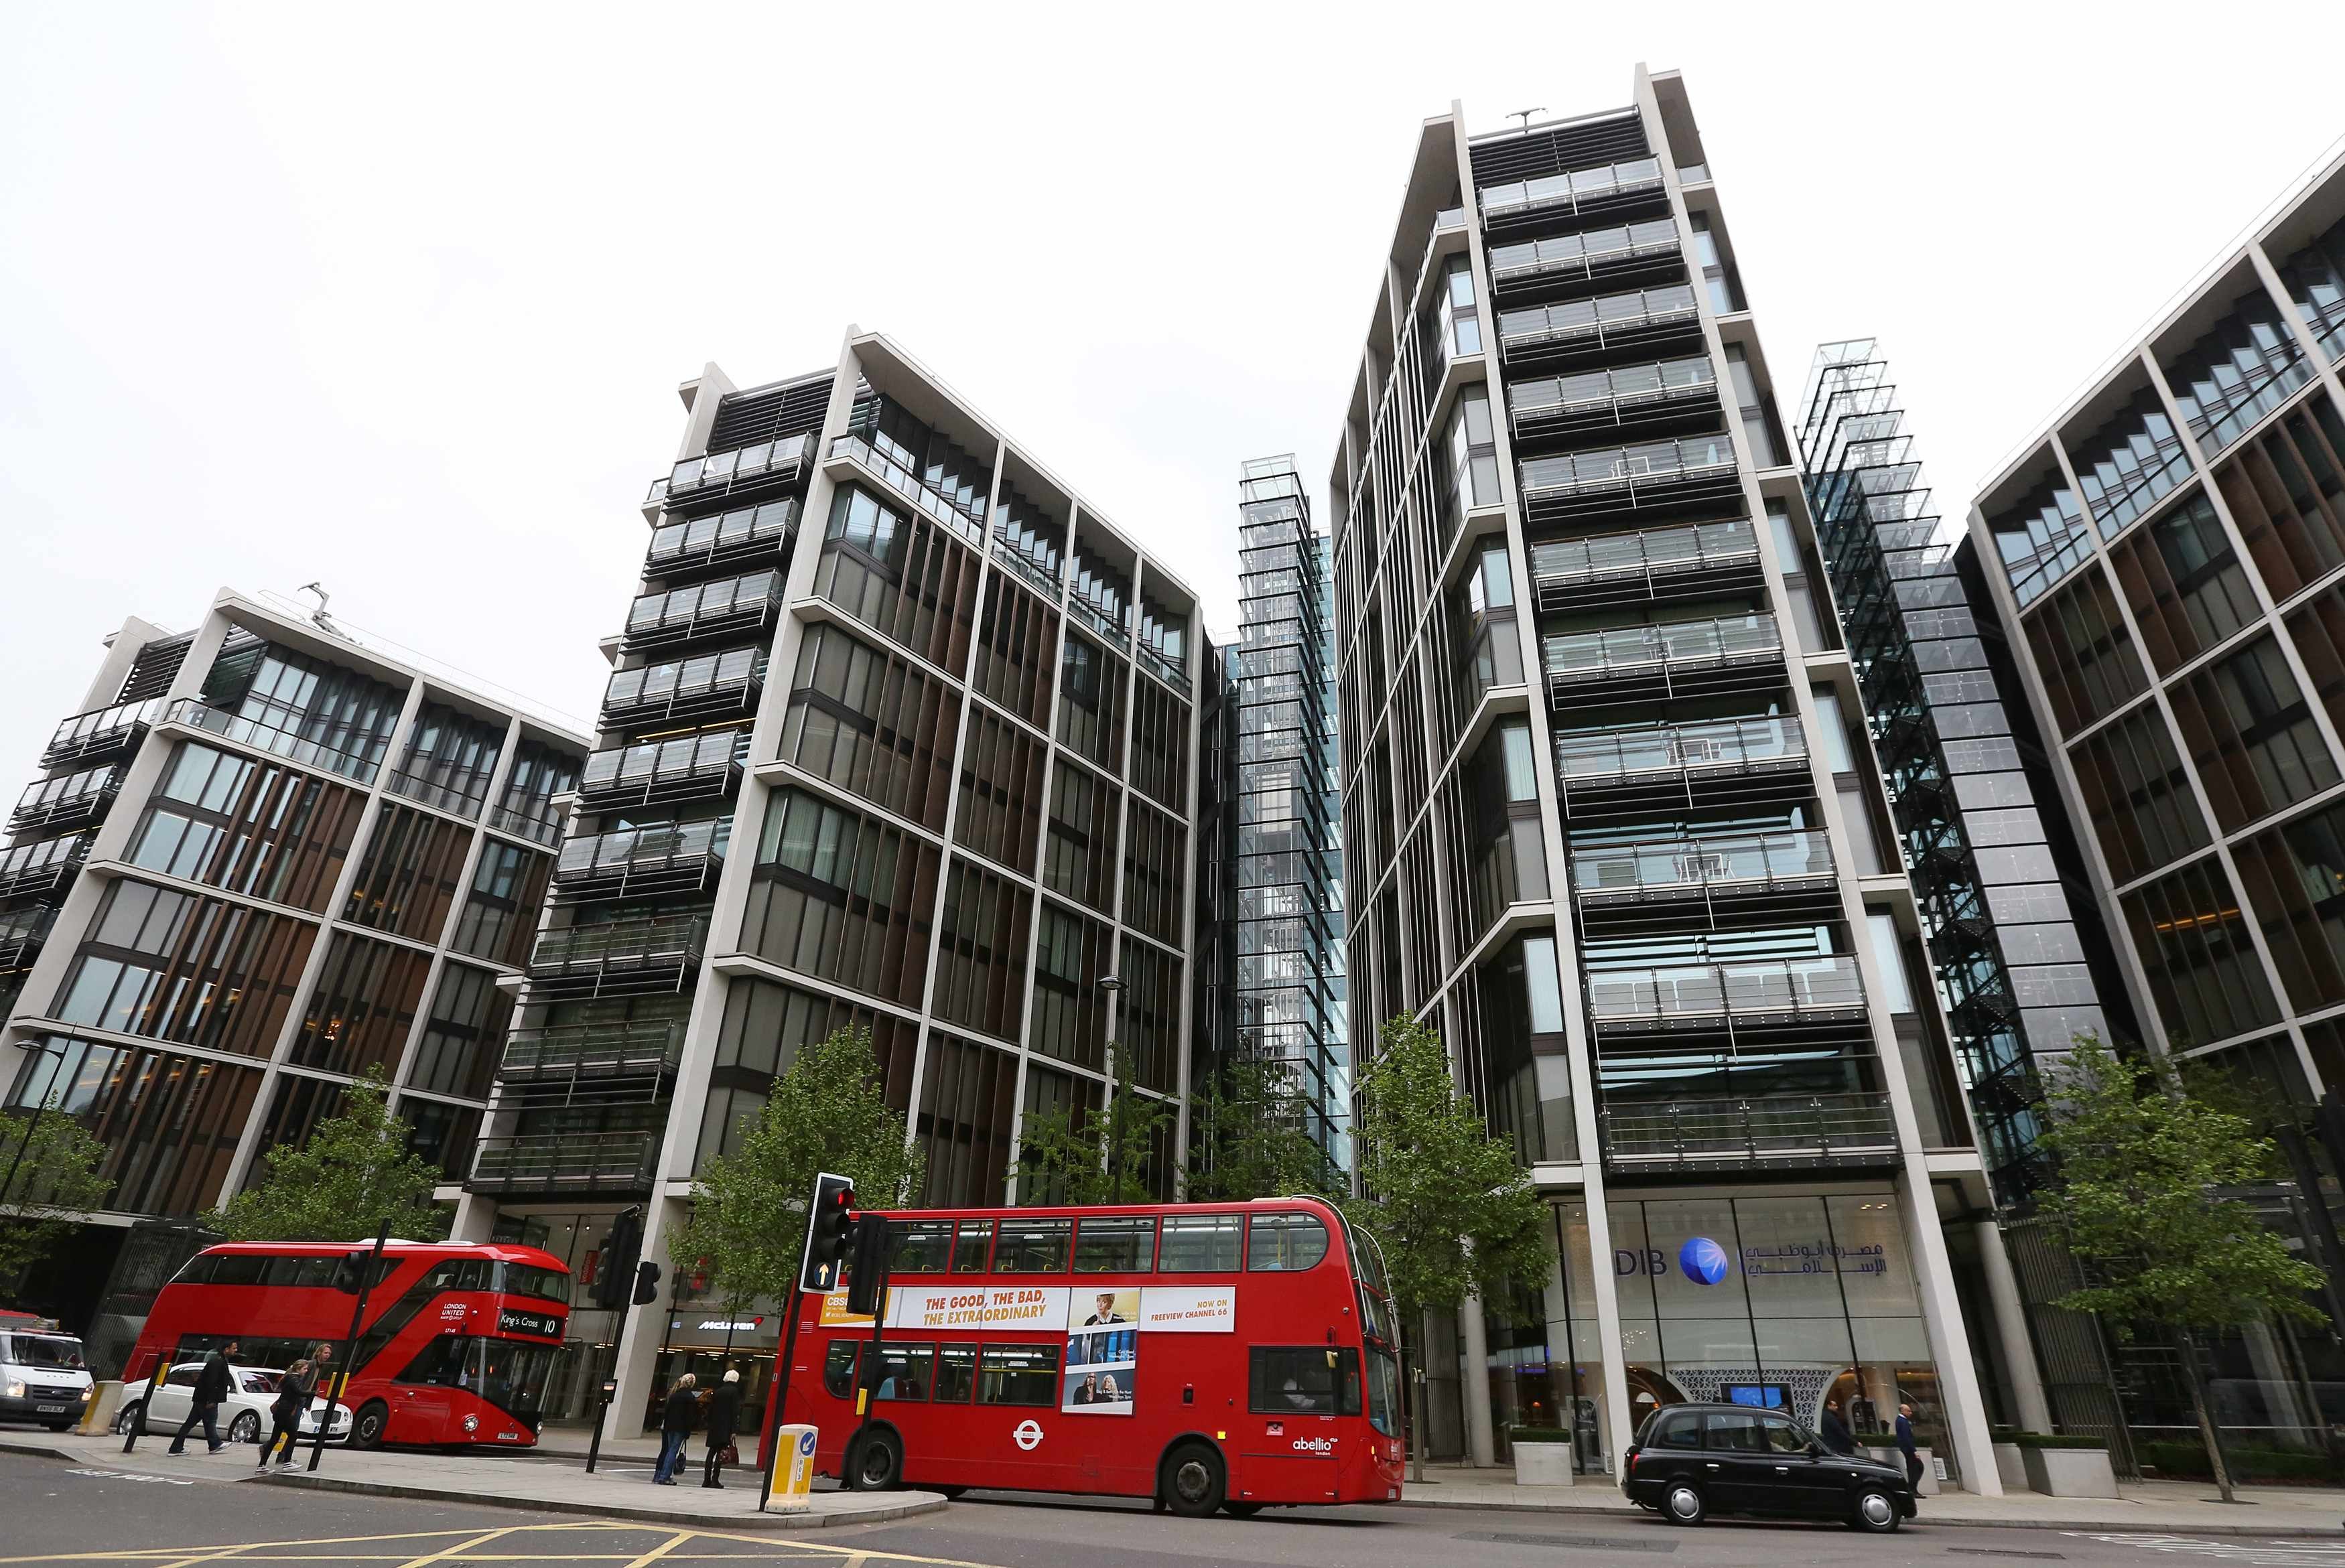 The development of One Hyde Park is seen in London